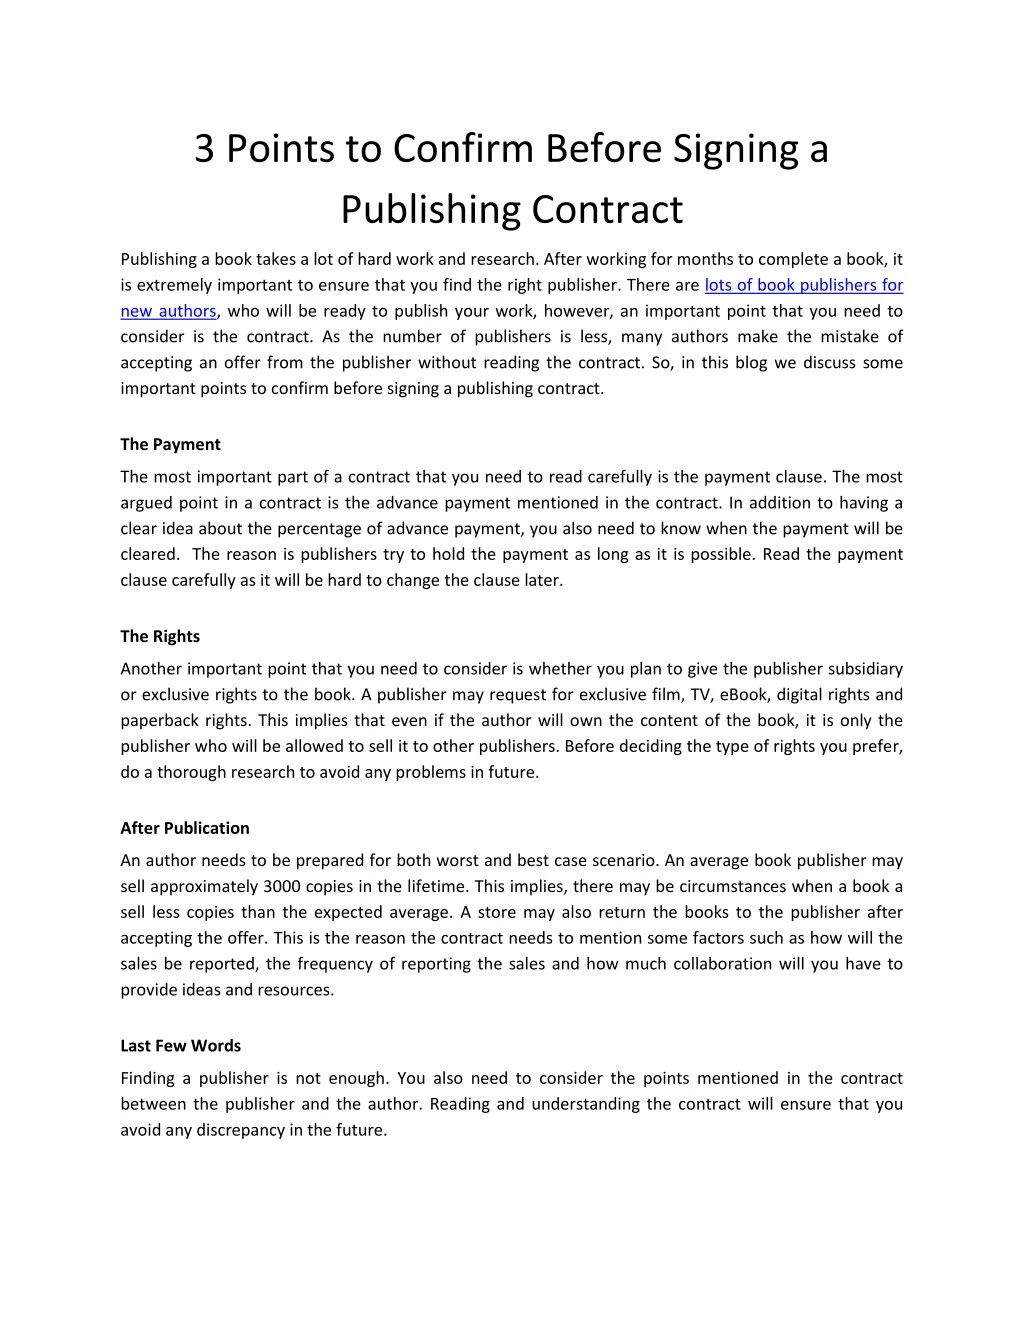 3 points to confirm before signing a publishing